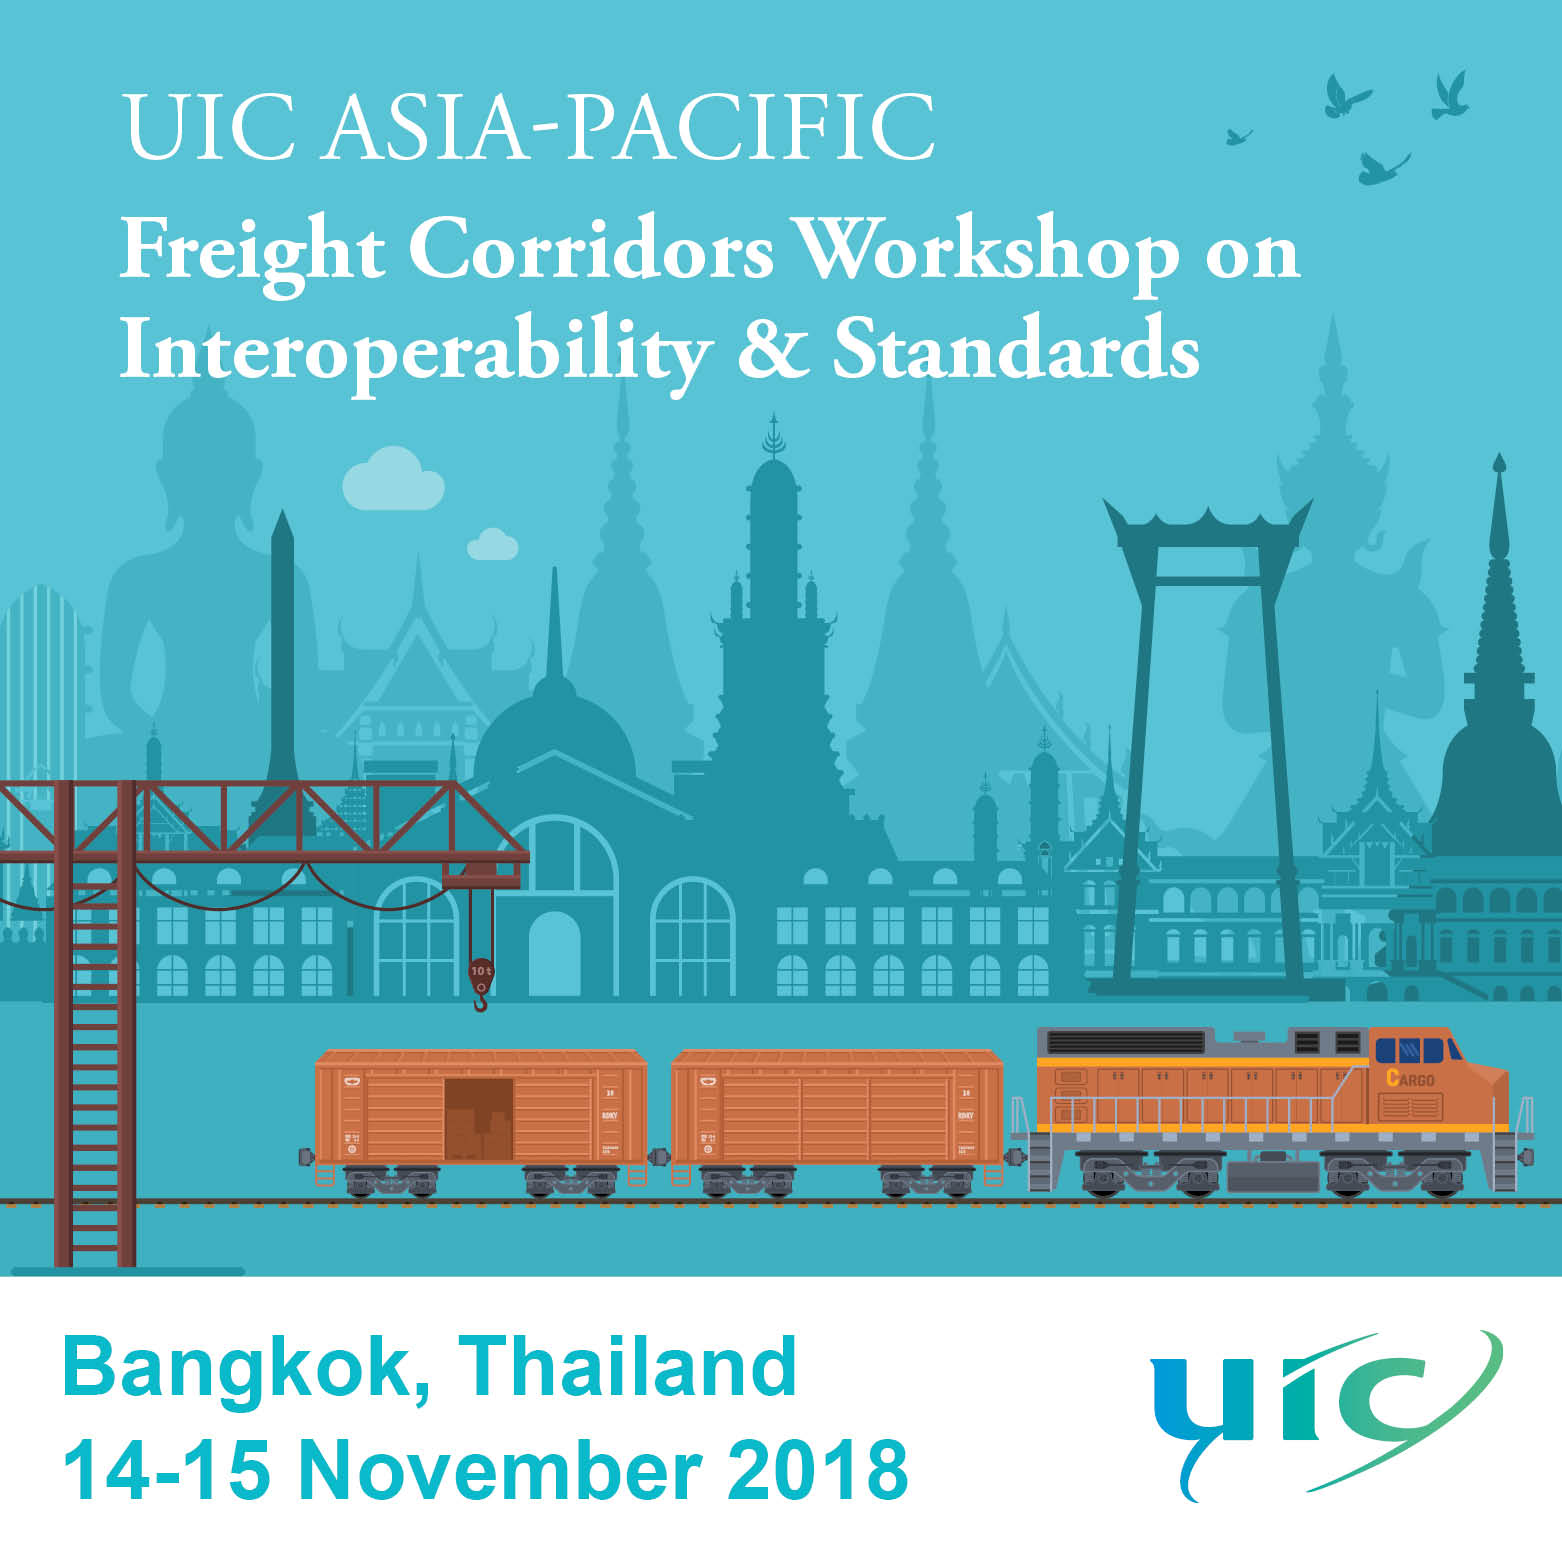 UIC Asia-Pacific Freight Corridors Workshop on Interoperability & Standards